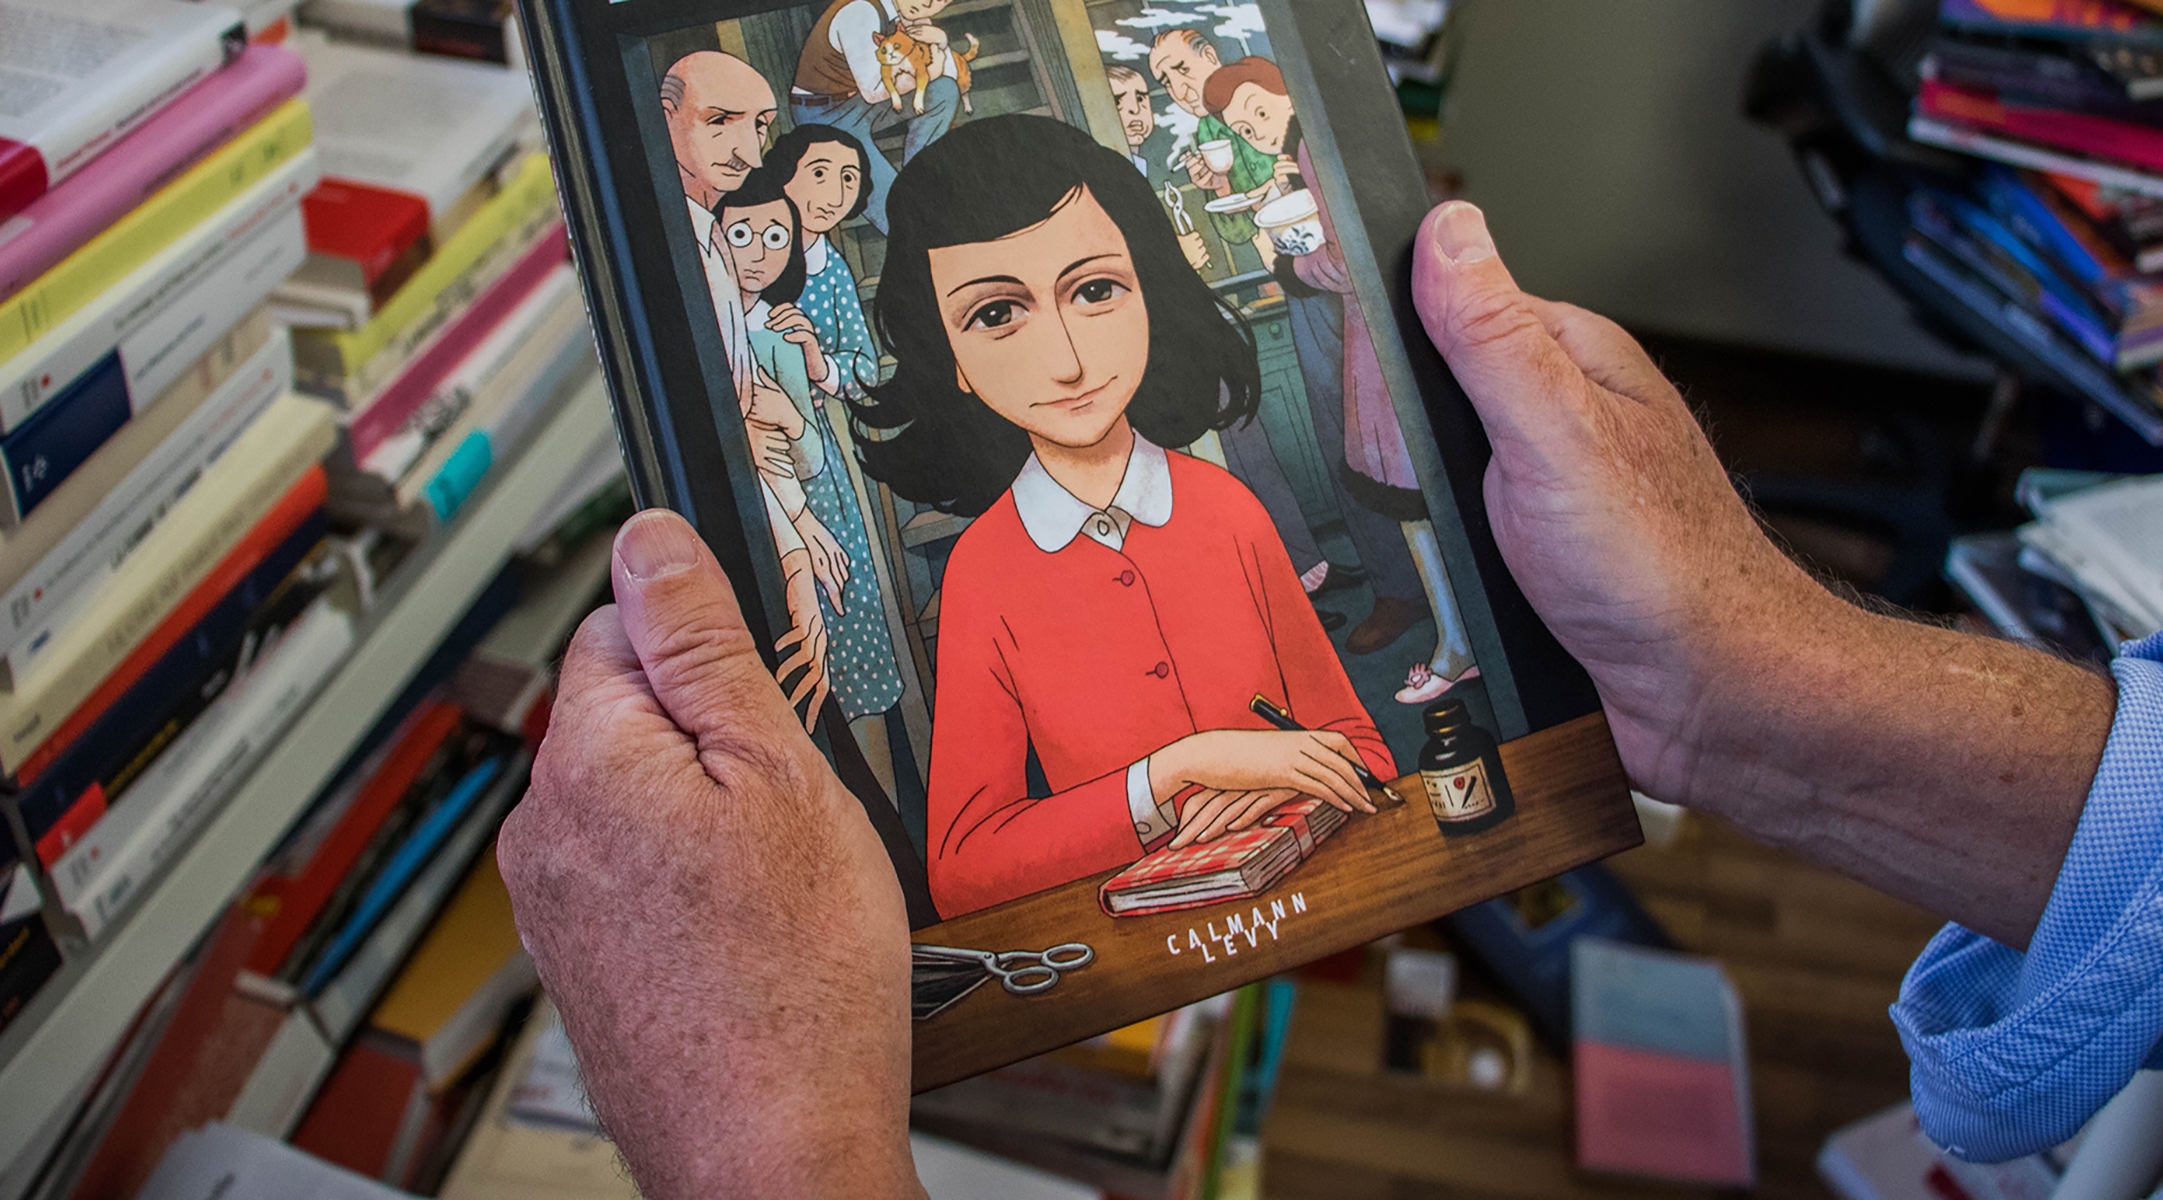 Amid outcry, Texas superintendent says Anne Frank adaptation will be back on shelves ‘very soon’